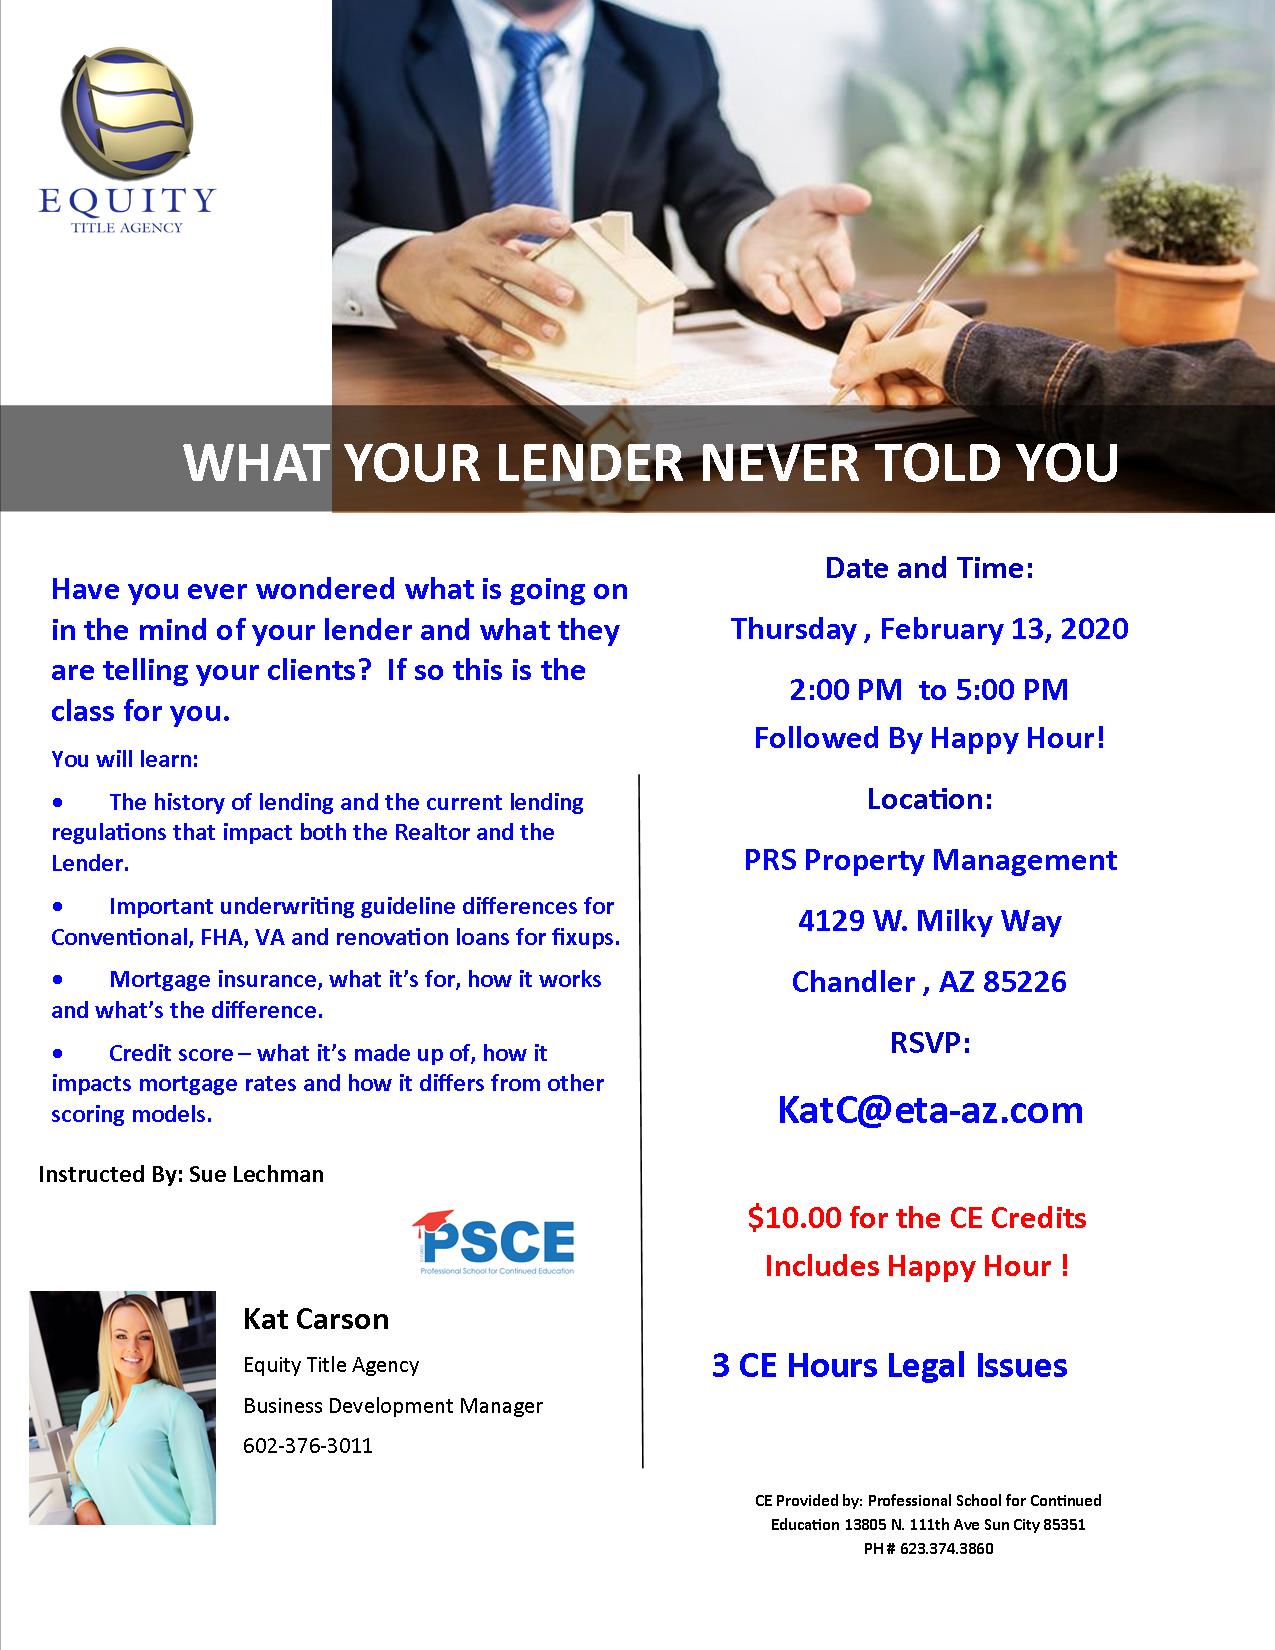 What Your Lender Never Told You